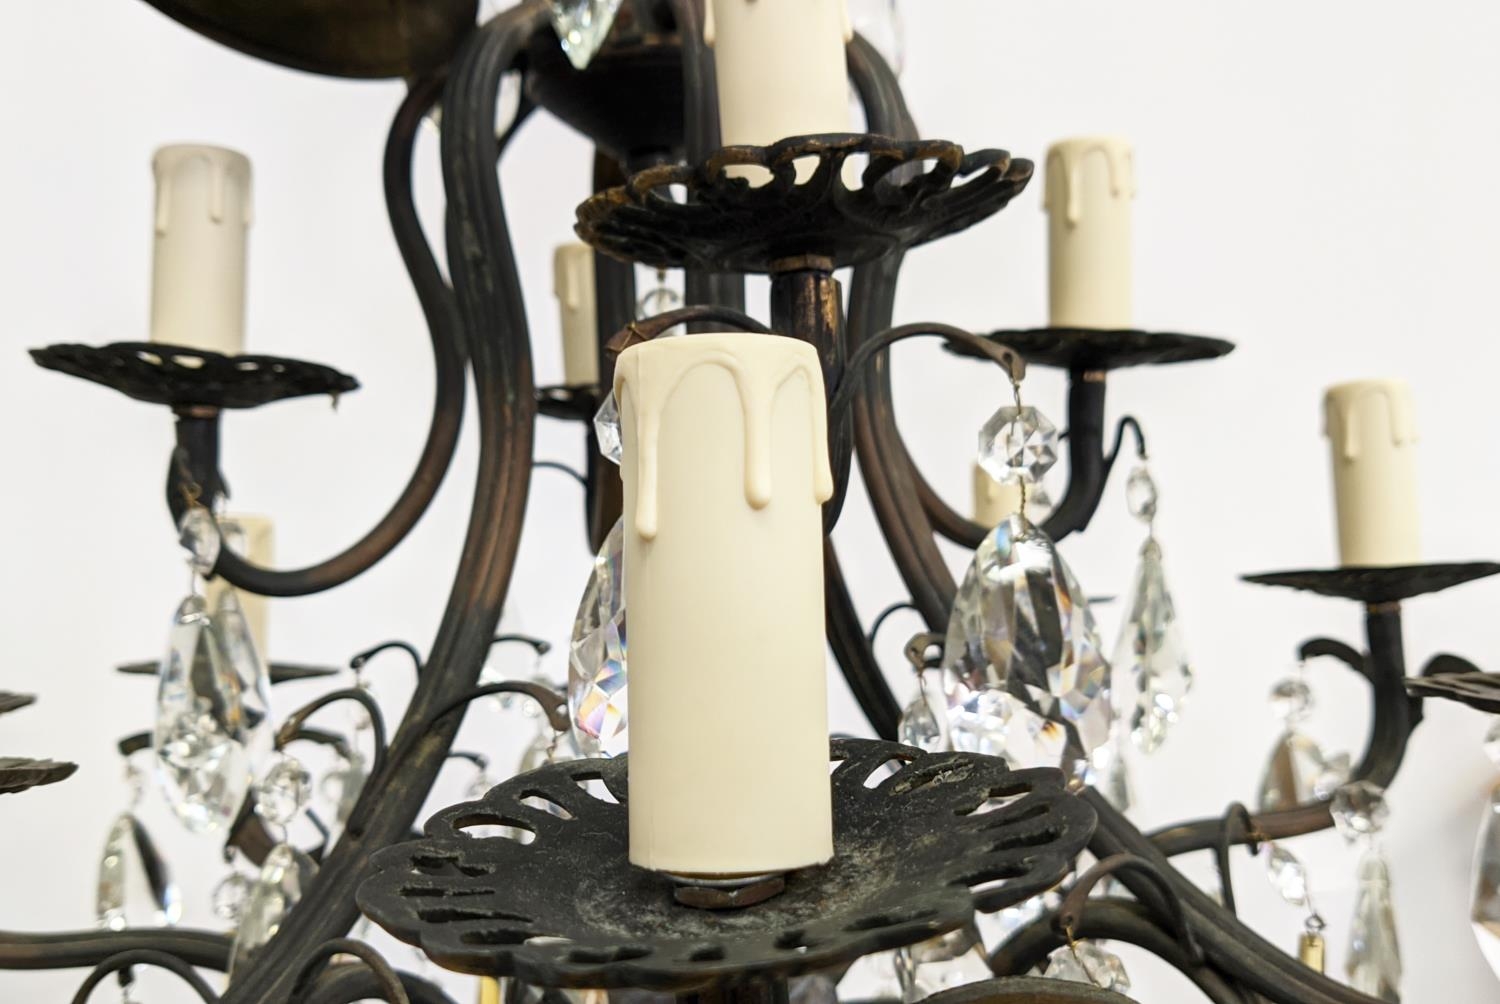 CHANDELIER, similar to previous lot fitted with twelve lights, 50cm W x 110cm H, including chain. - Image 10 of 14